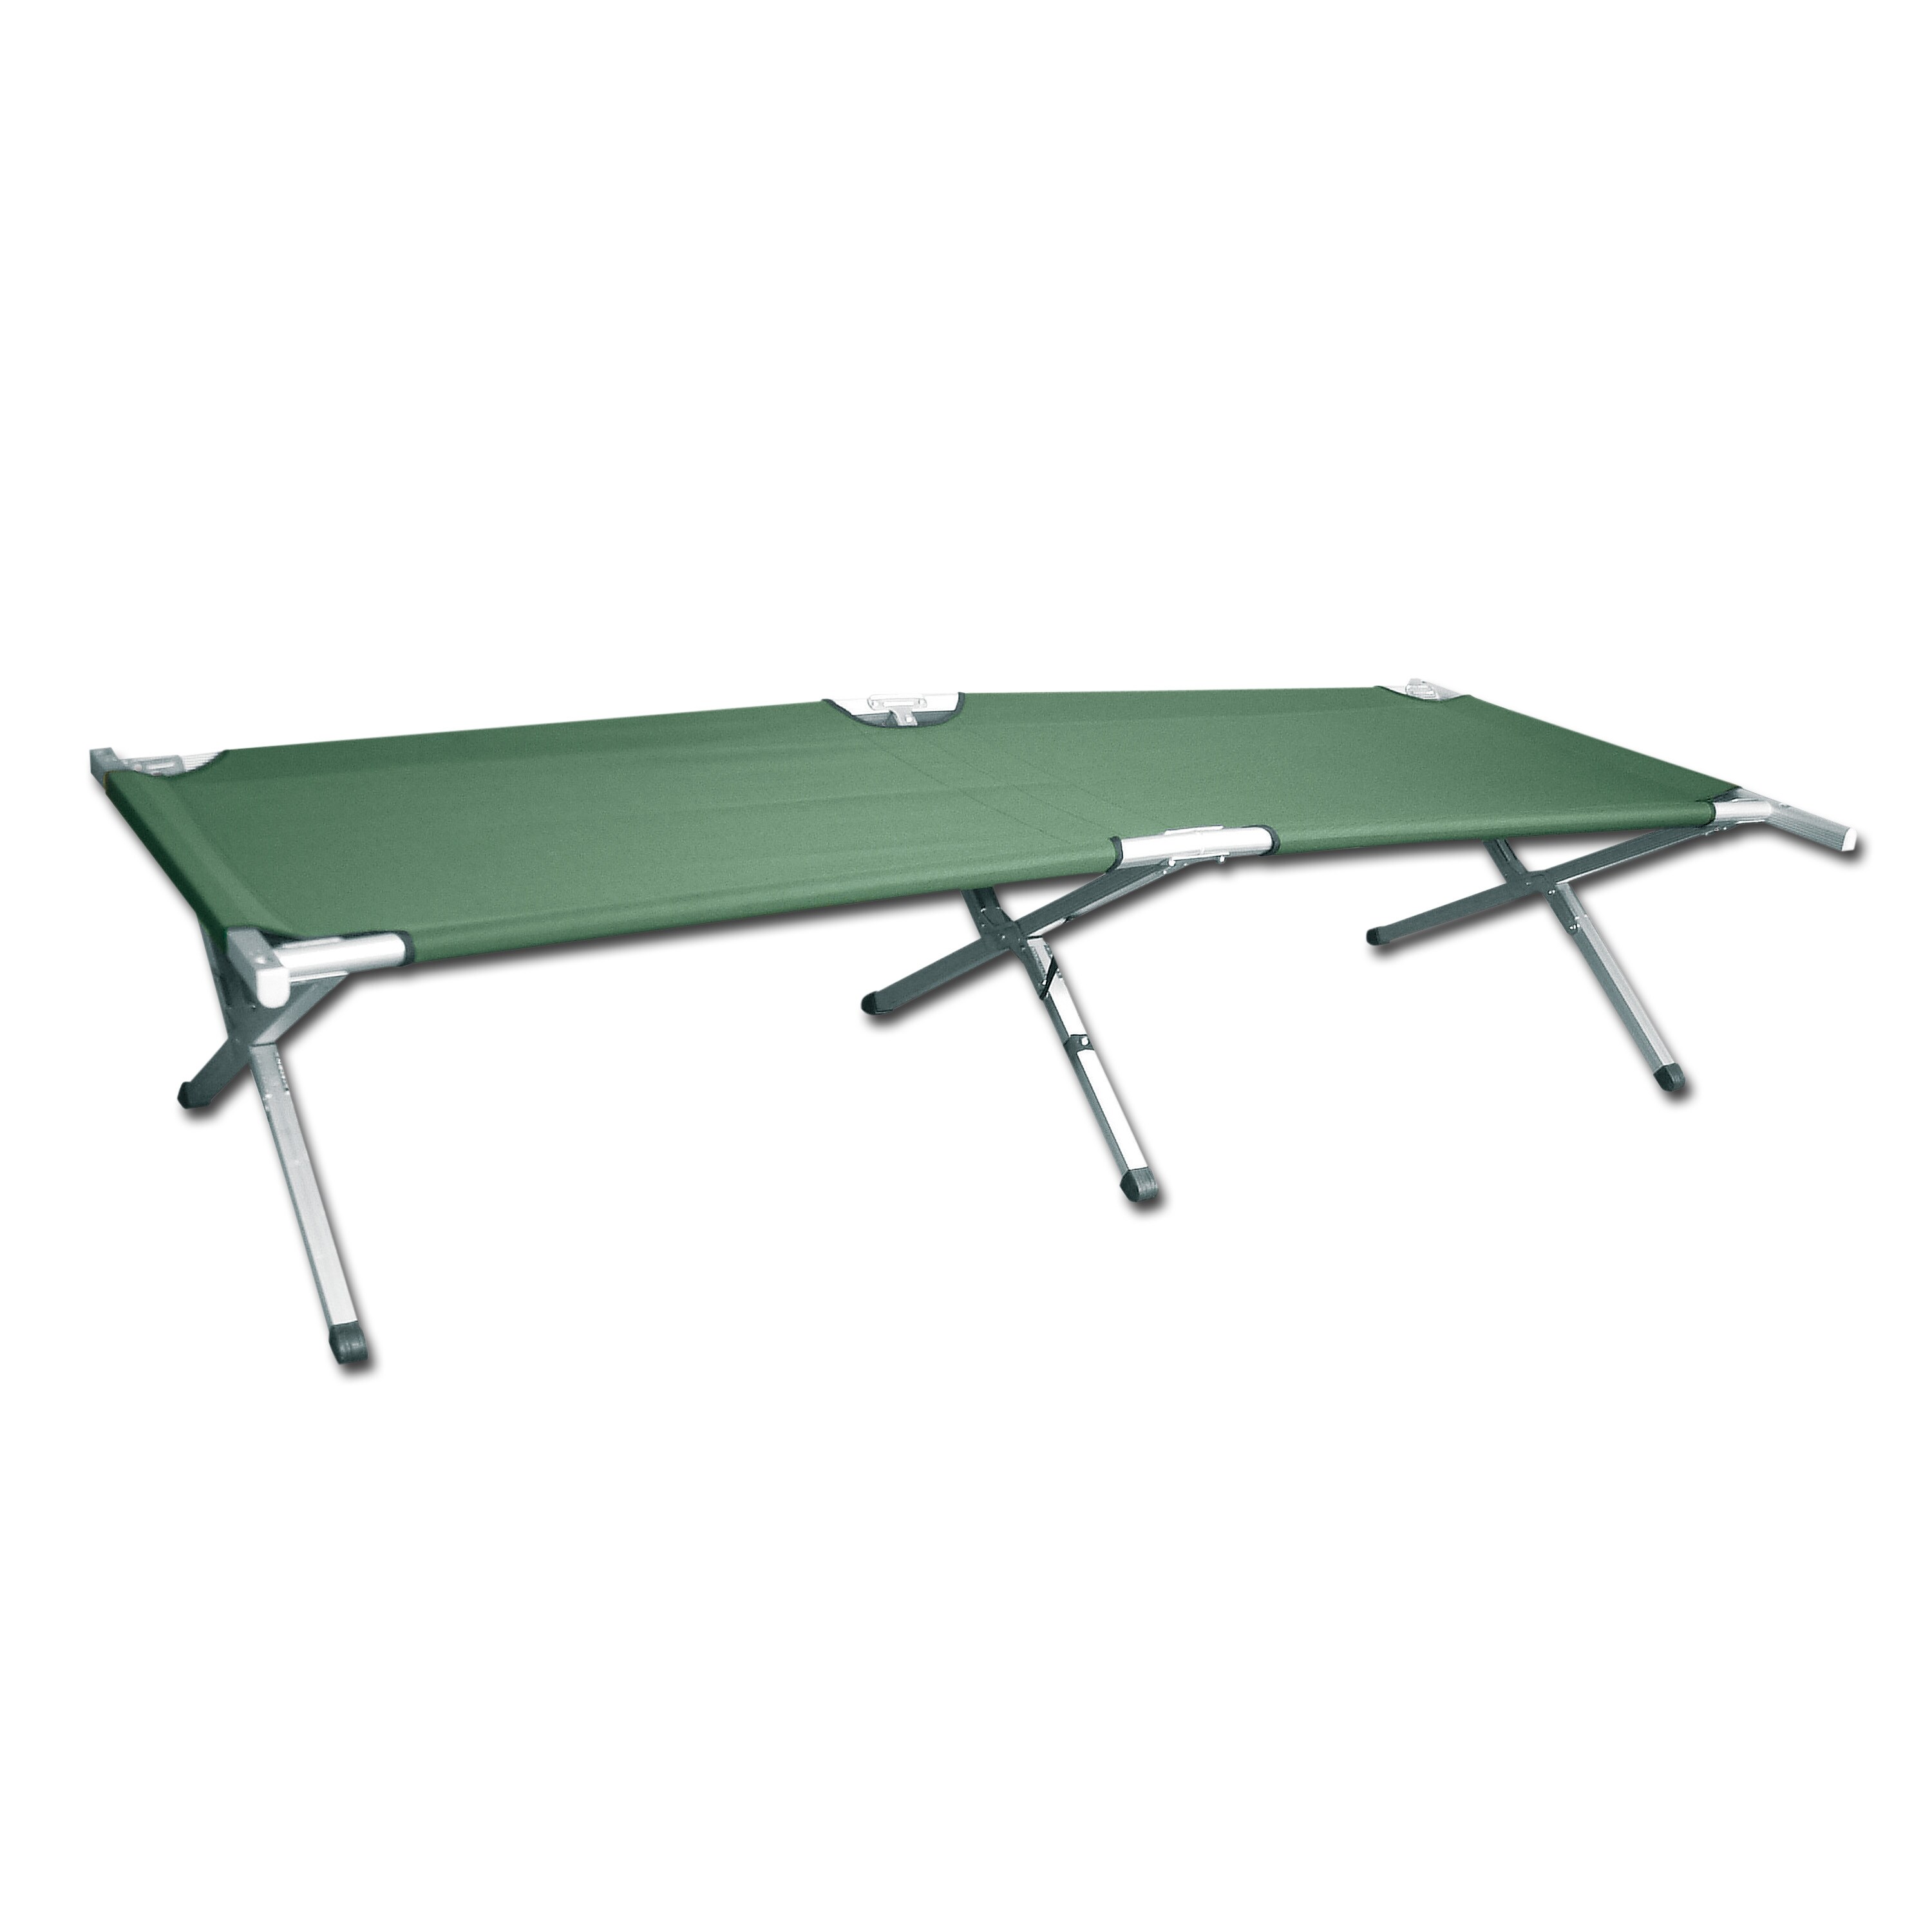 folding camping cot field bed steel frame olive drab rothco 4560 